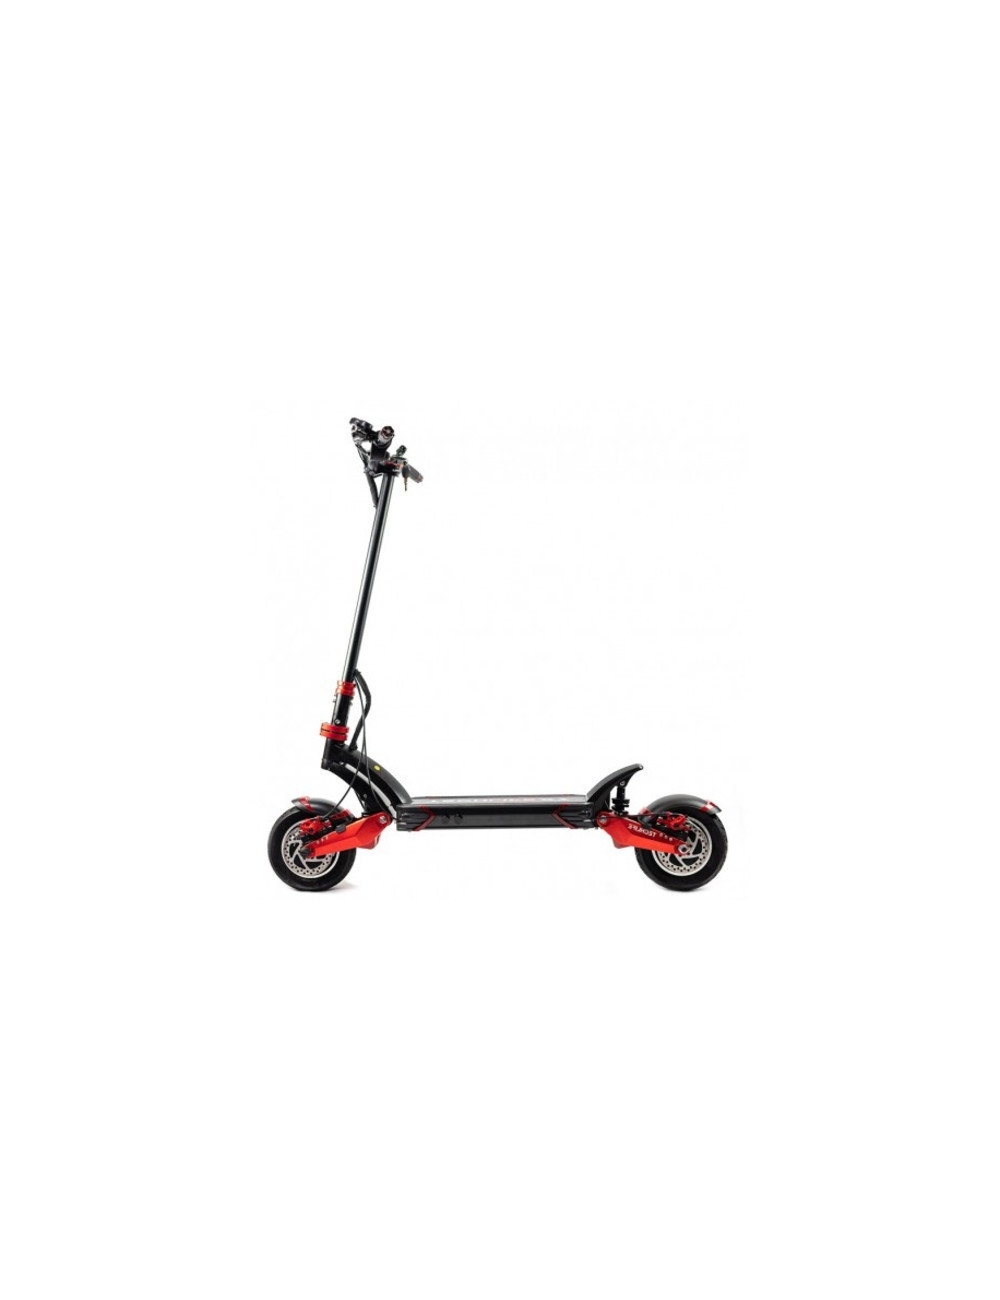 TECHLIFE SCOOTER x7s